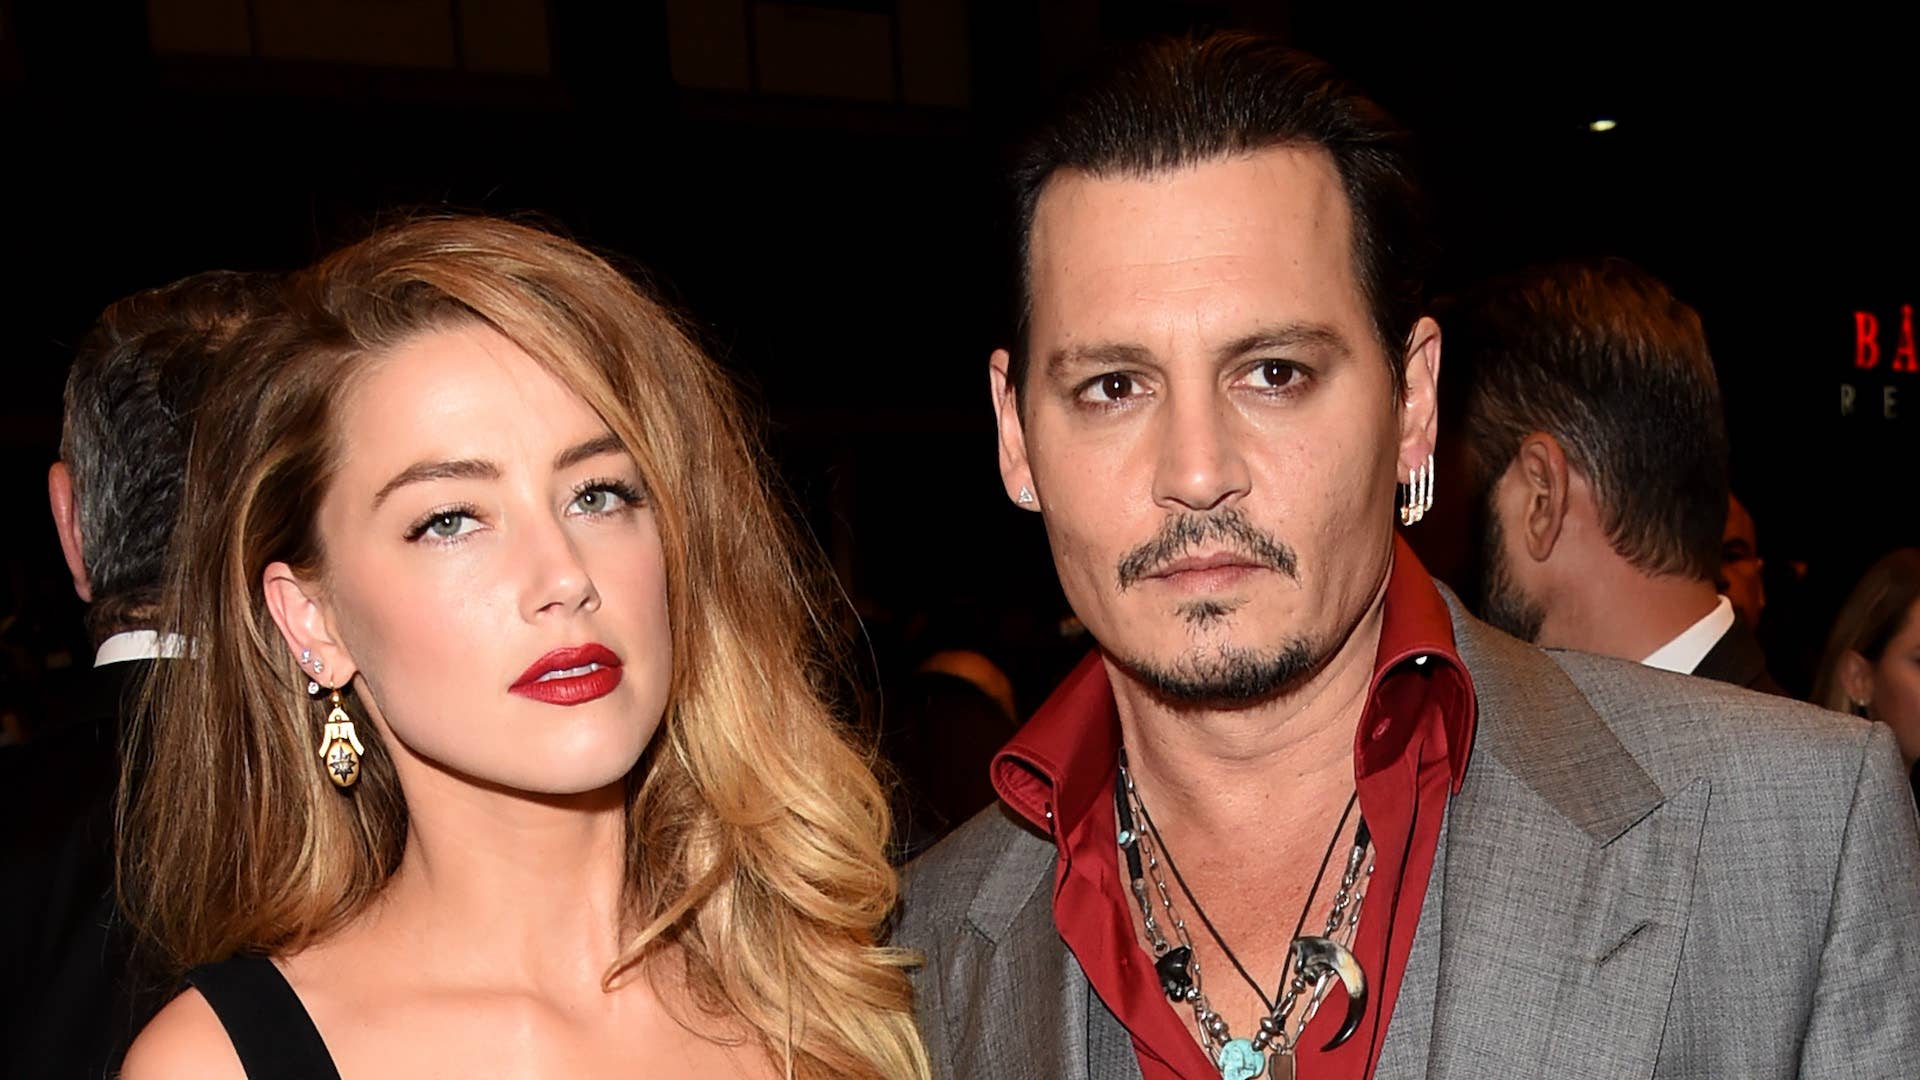 Johnny Depp and Amber Heard photographed in Toronto